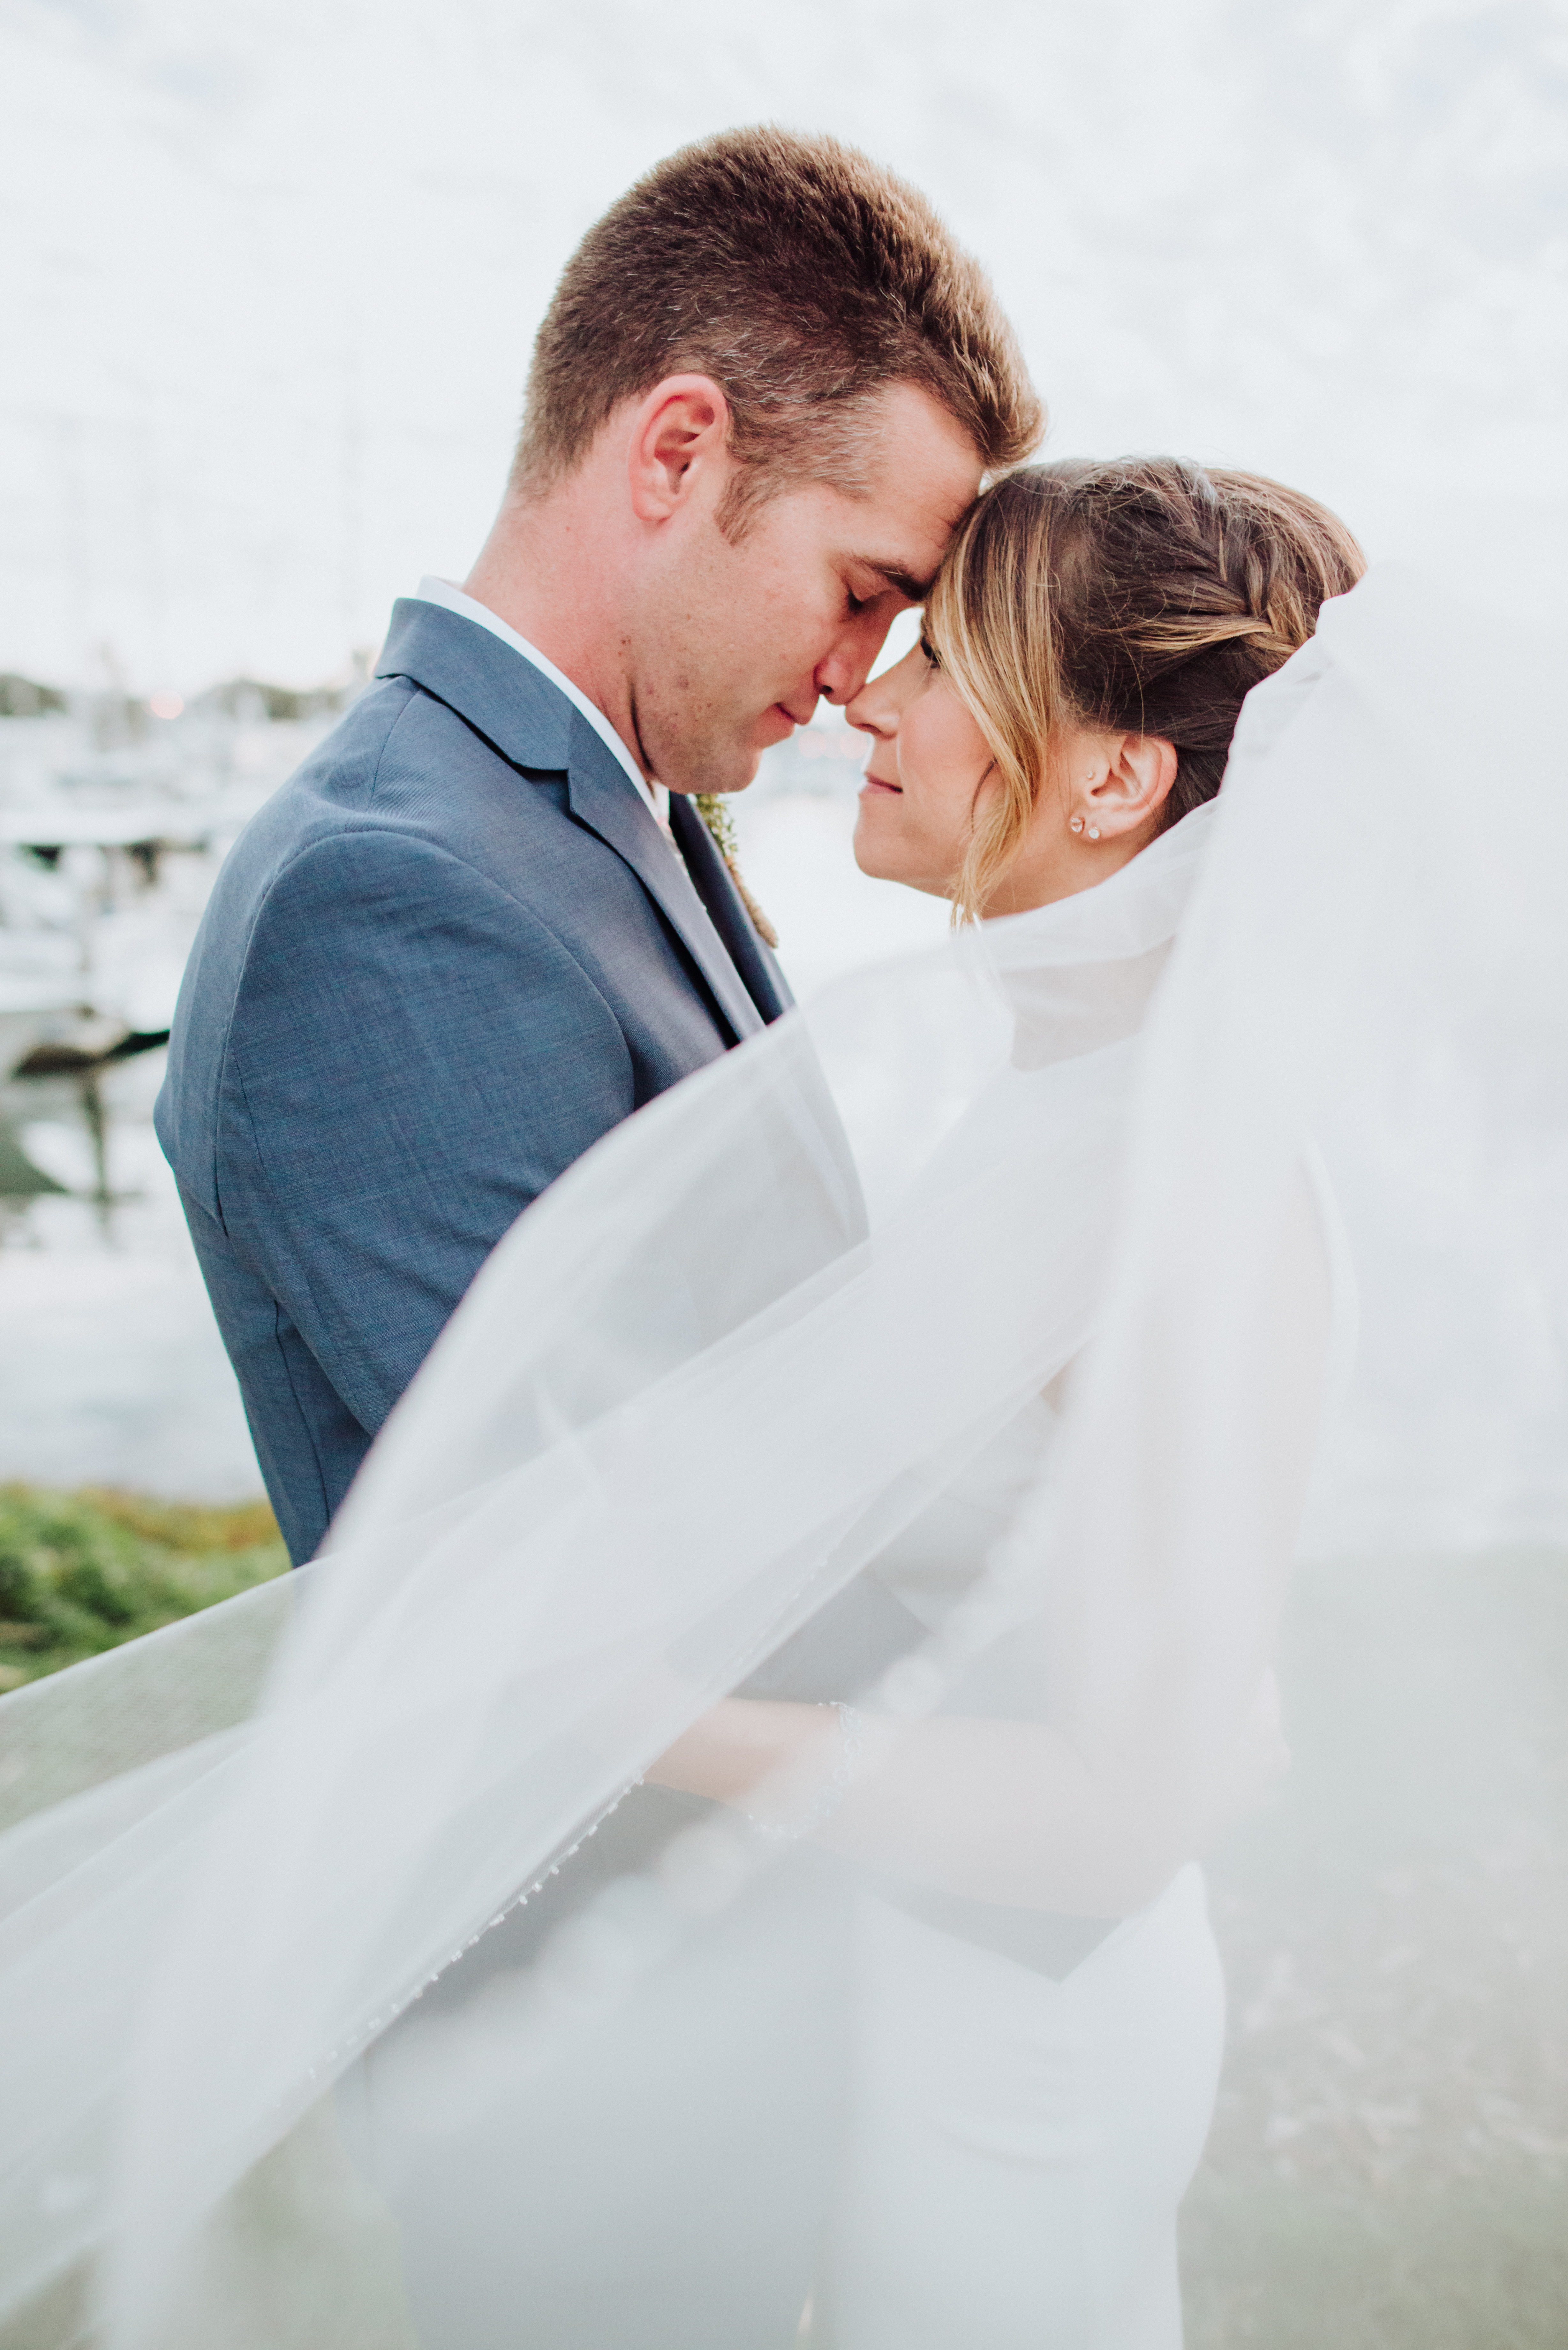 Bride and groom portraits with veilat a Romantic Style San Diego Wedding at Marina Village by Kylie Rae Photography